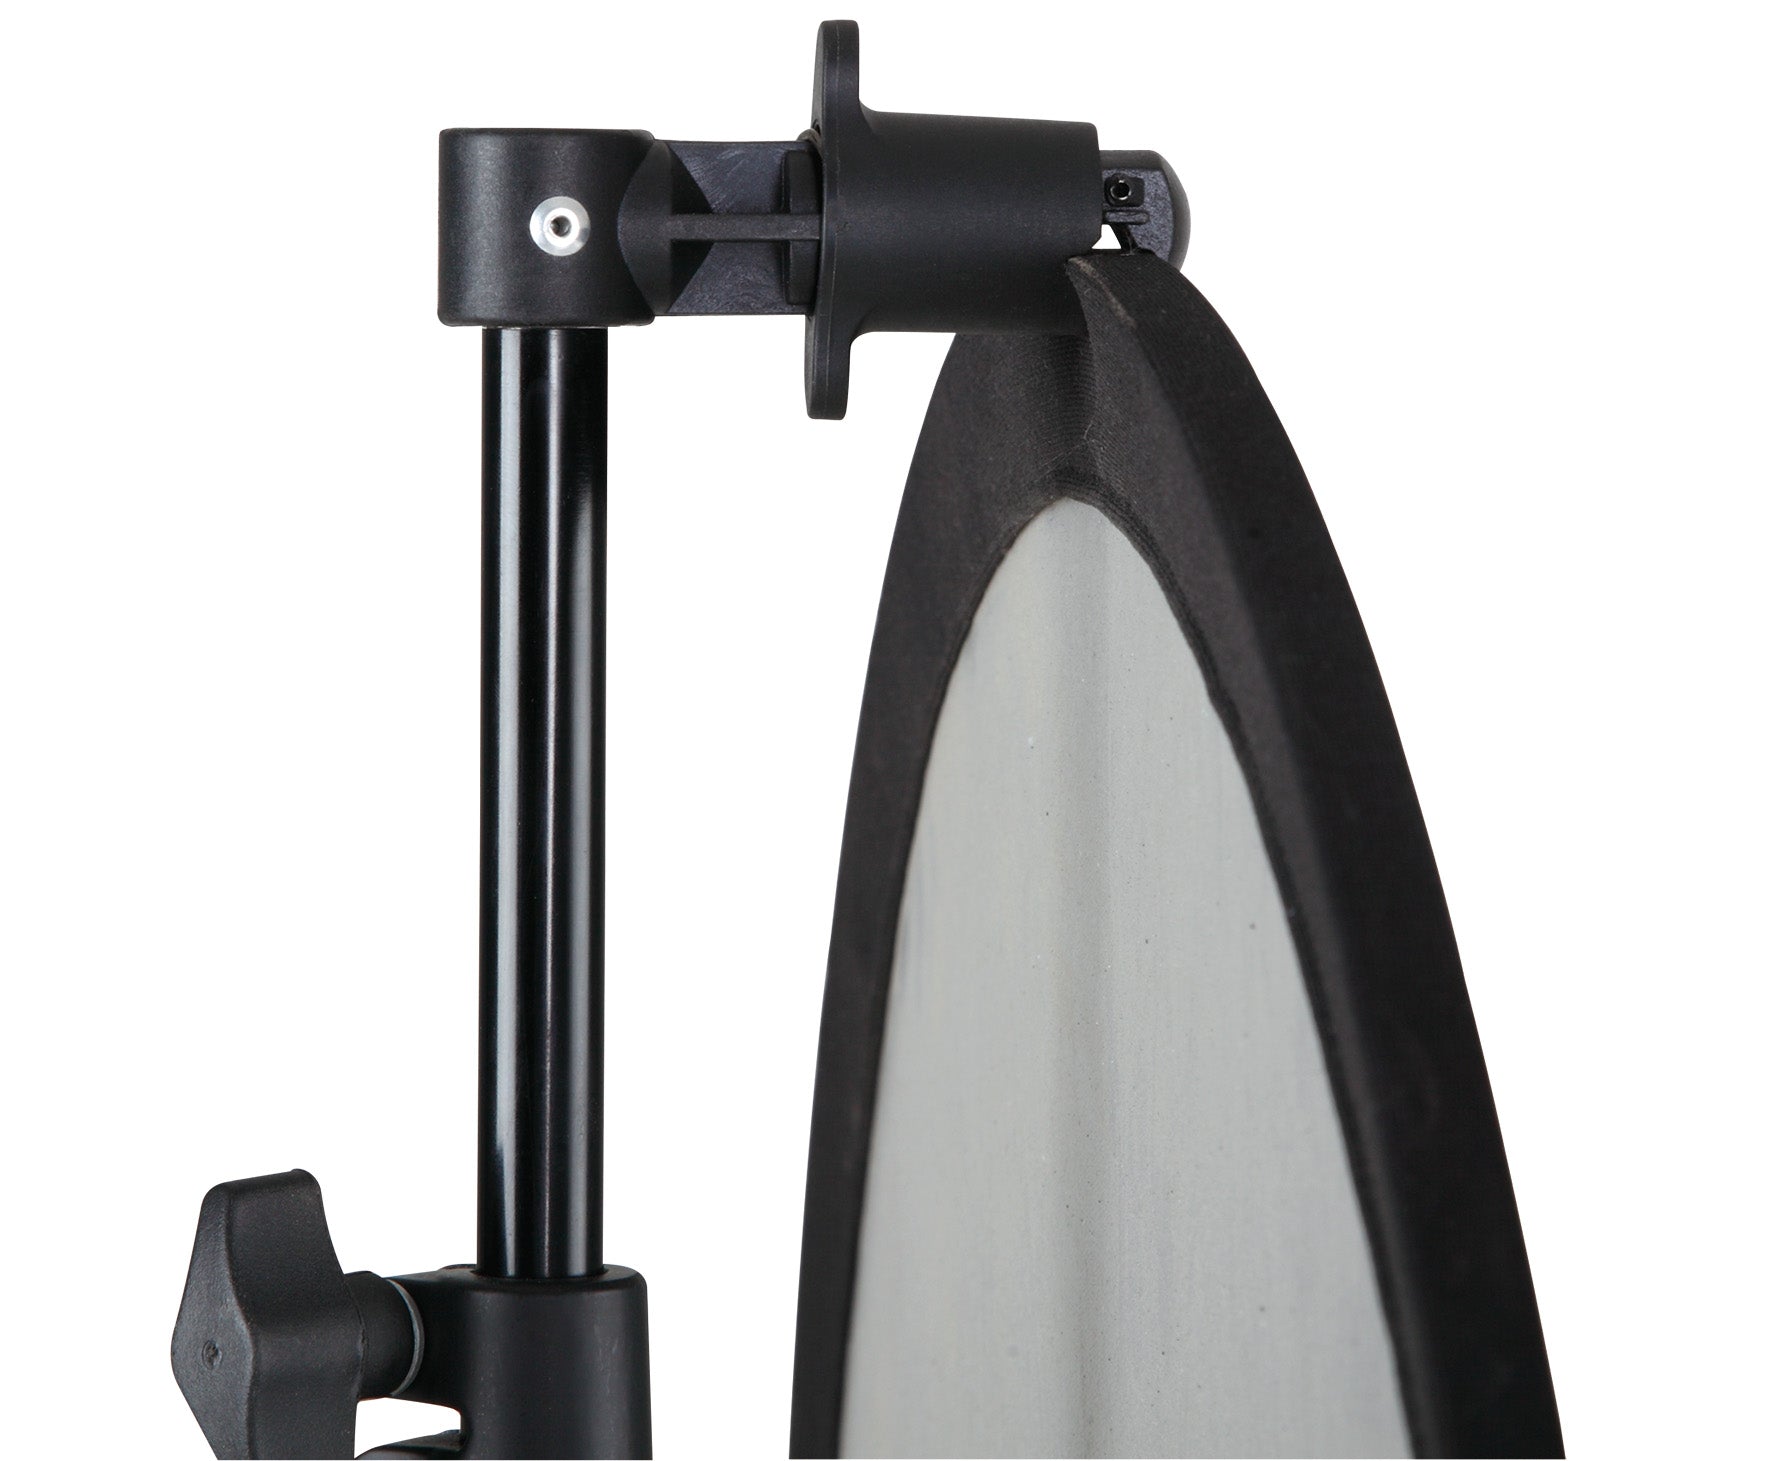 Collapsible Background Backdrop Reflector Stand Holder